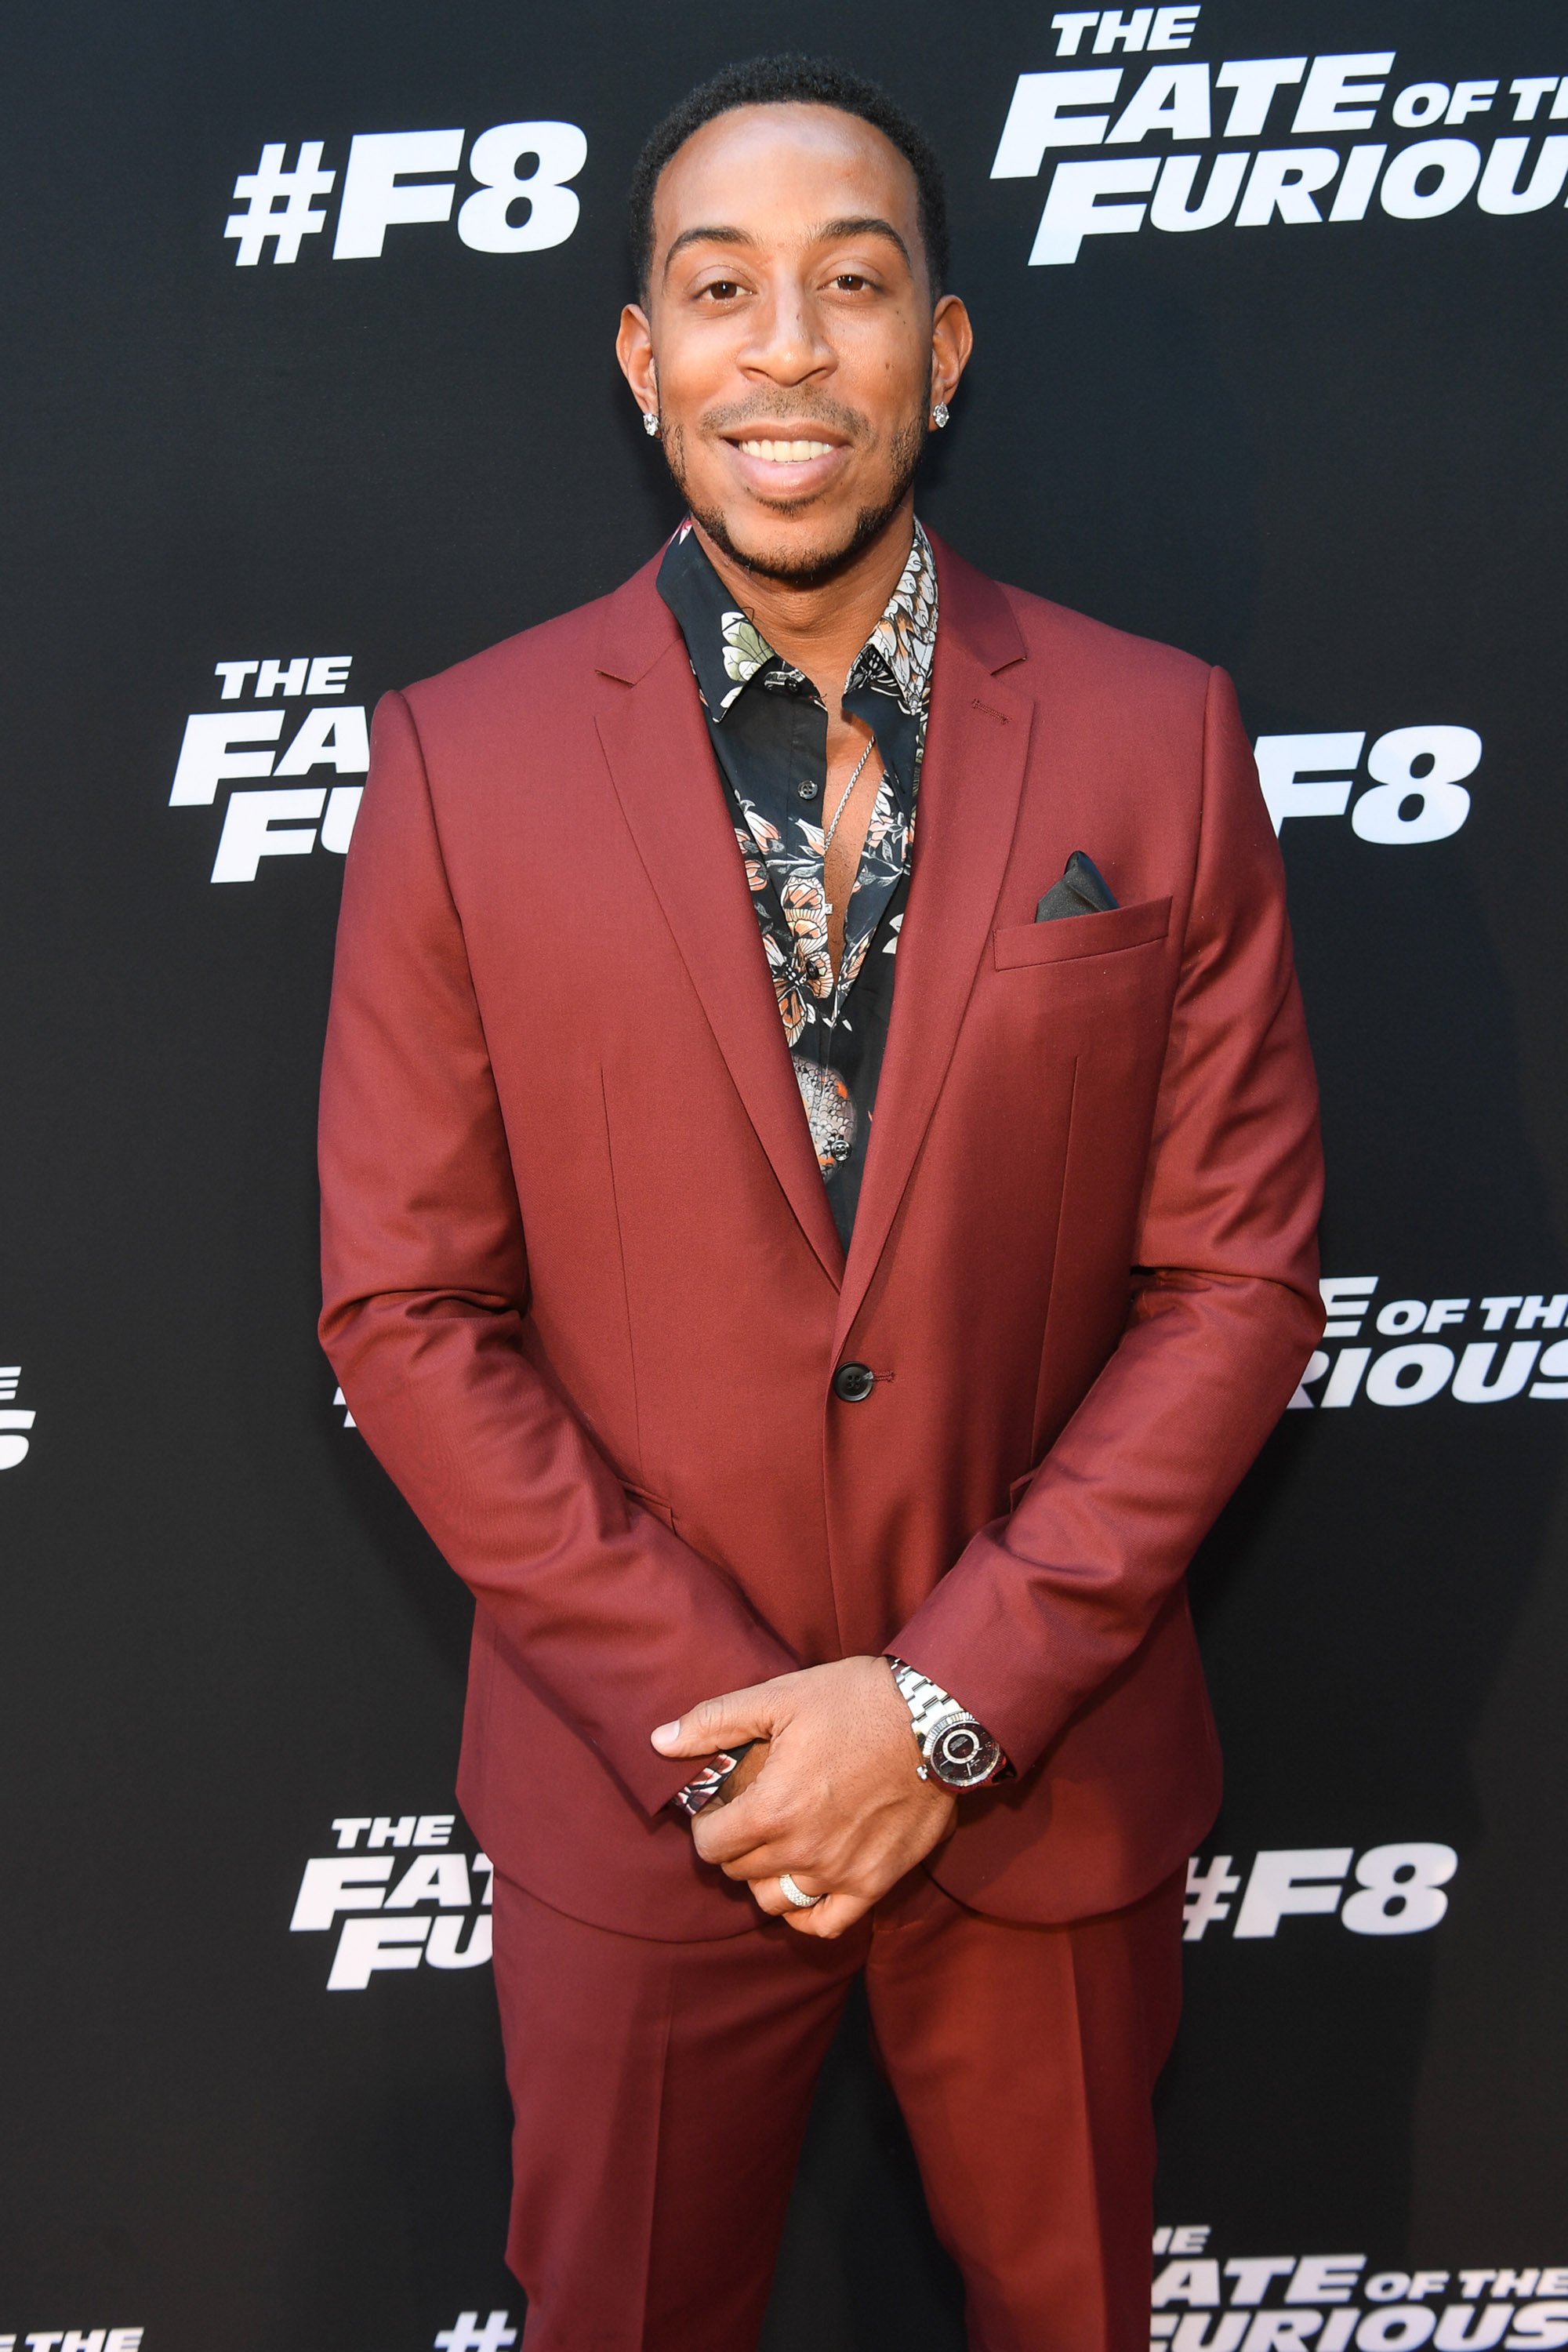 Multi-talented performer Ludacris at the red carpet screening of "The Fate of the Furious" in 2017. | Photo: Getty Images